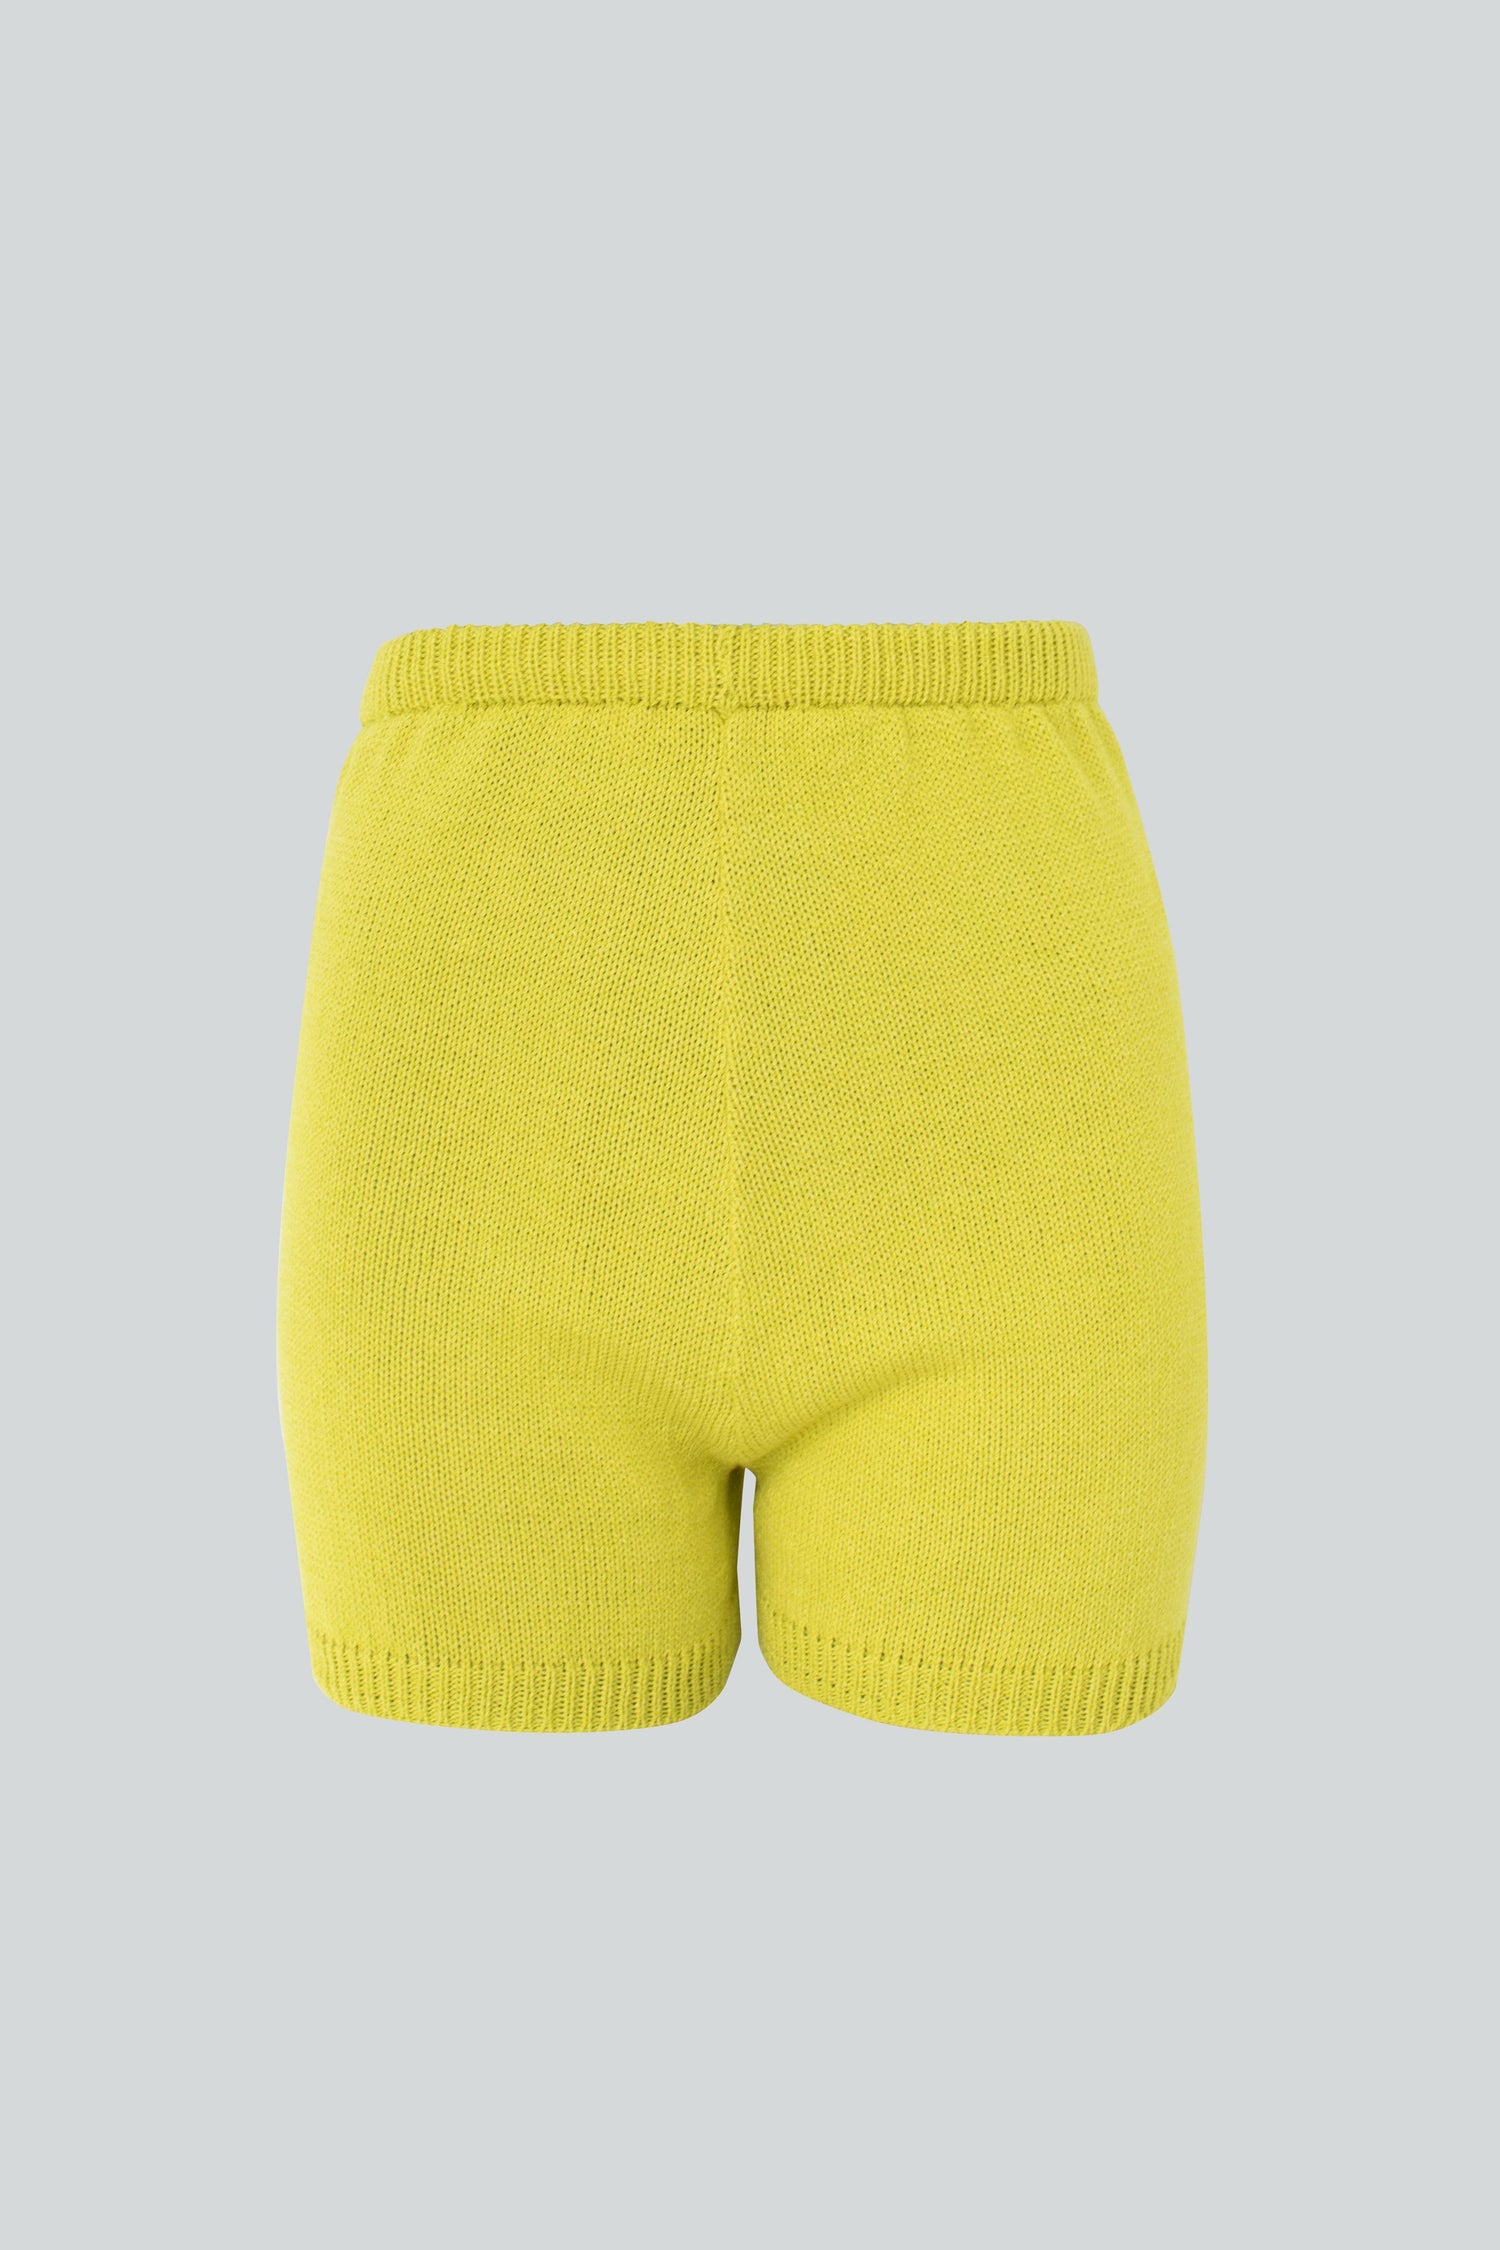 Leaf Knitted Shorts Yellow